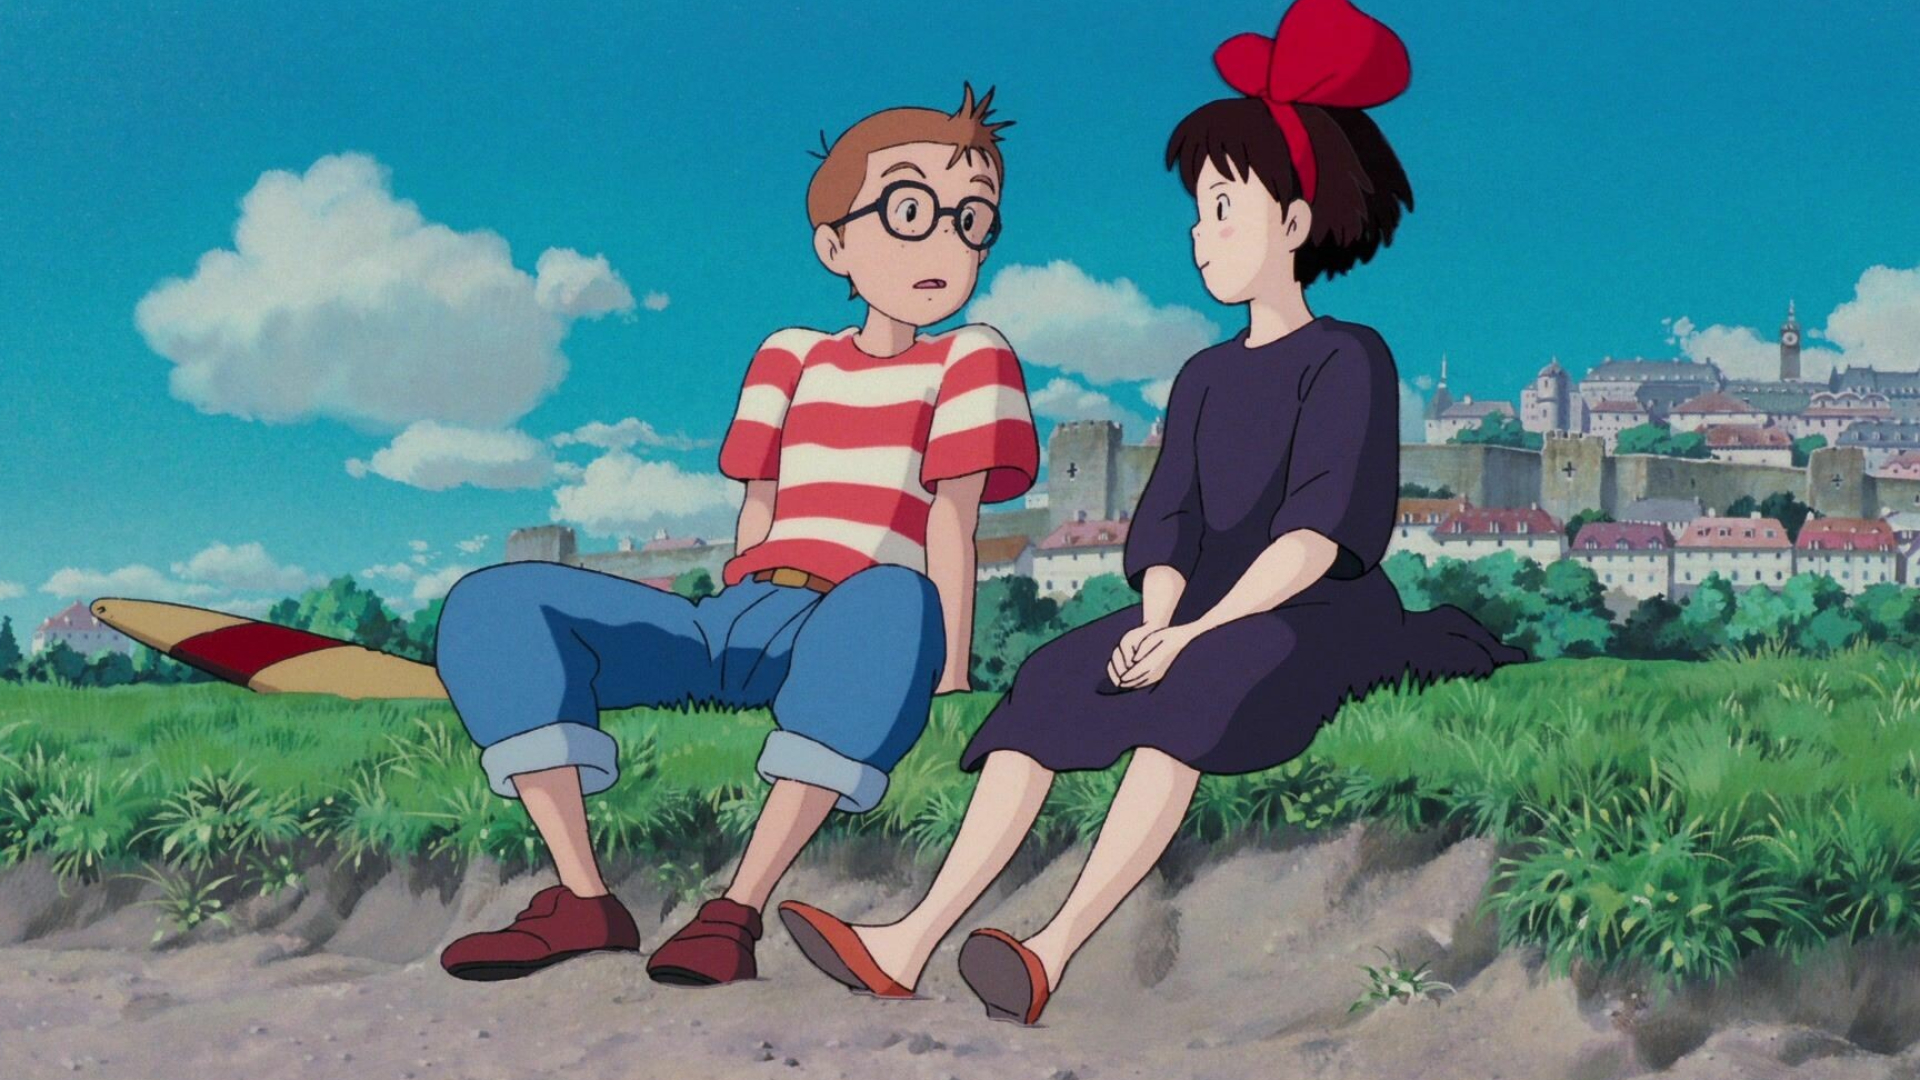 Kiki's Delivery Service: Tombo Kopoli, a 14-year-old aviation fanatic who becomes fascinated by Kiki and her ability to fly. 1920x1080 Full HD Wallpaper.